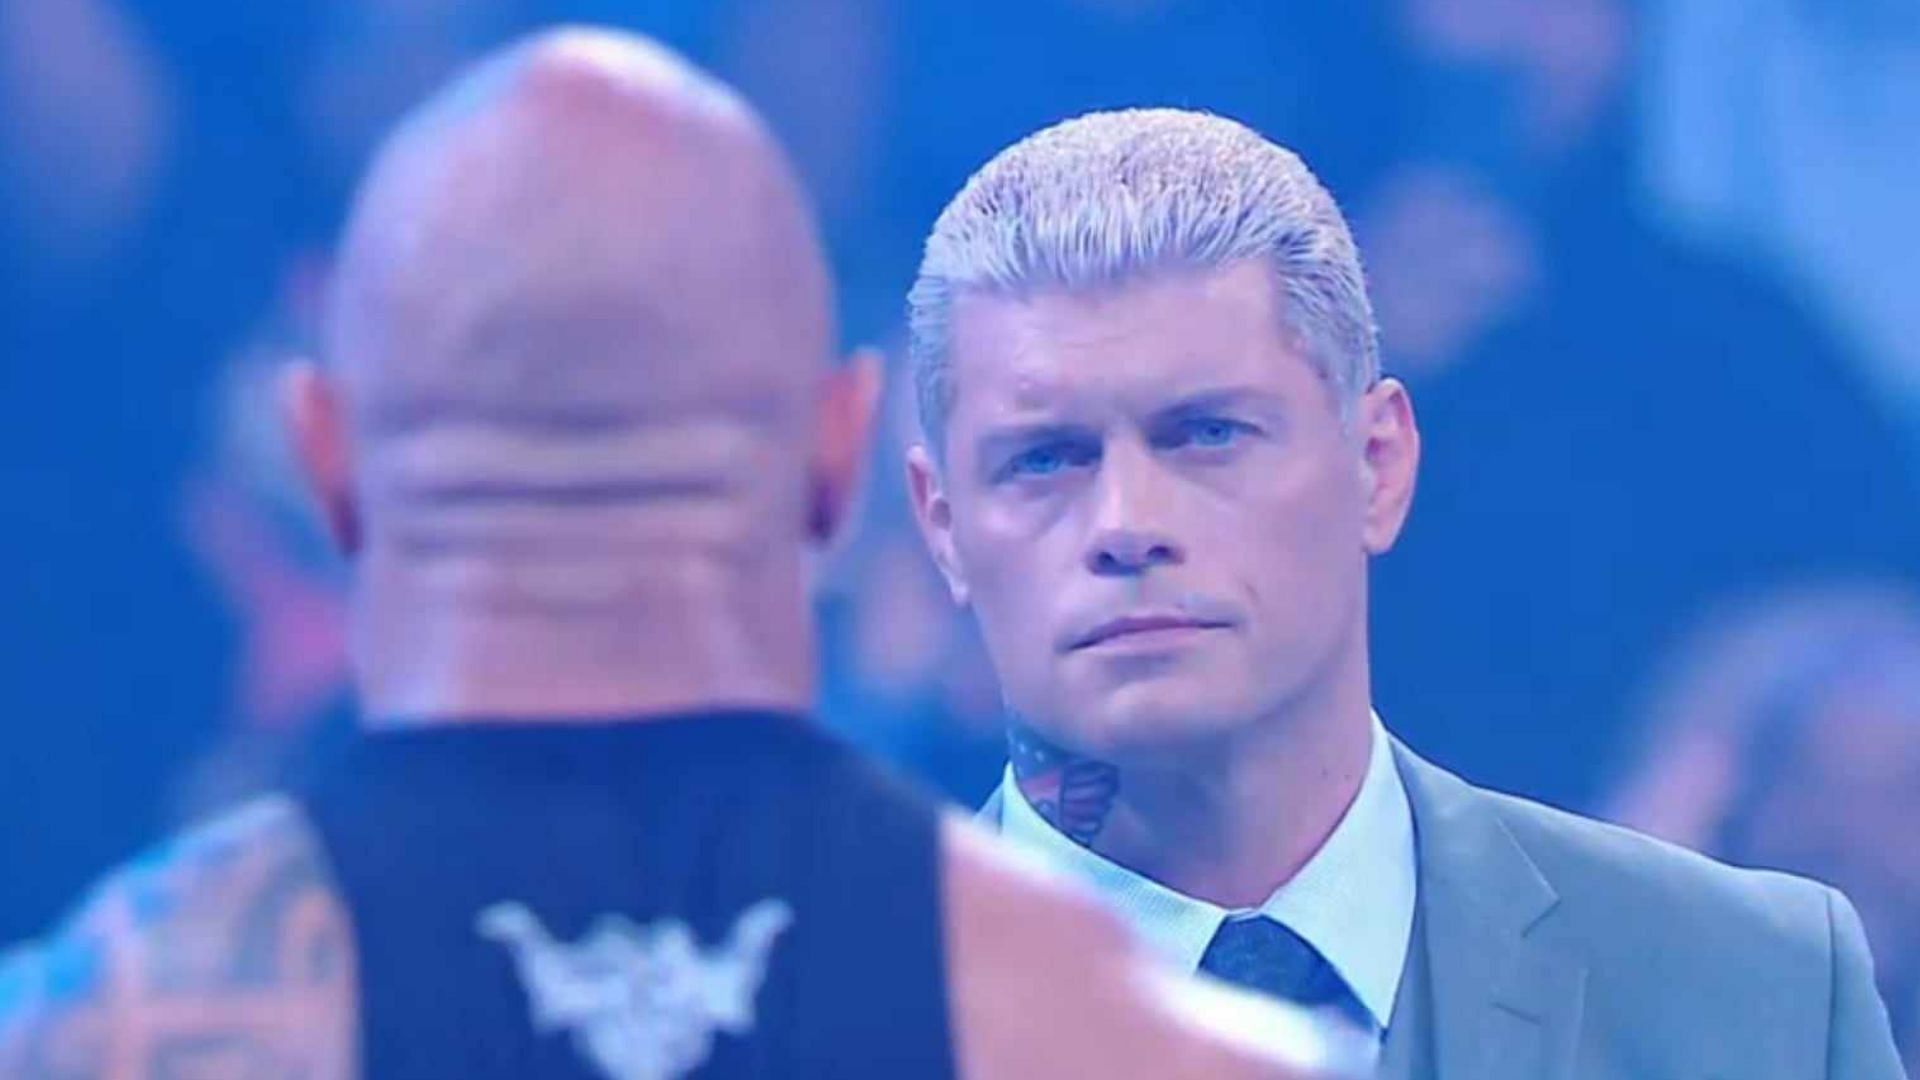 Cody Rhodes gave his WrestleMania main event to The Rock.